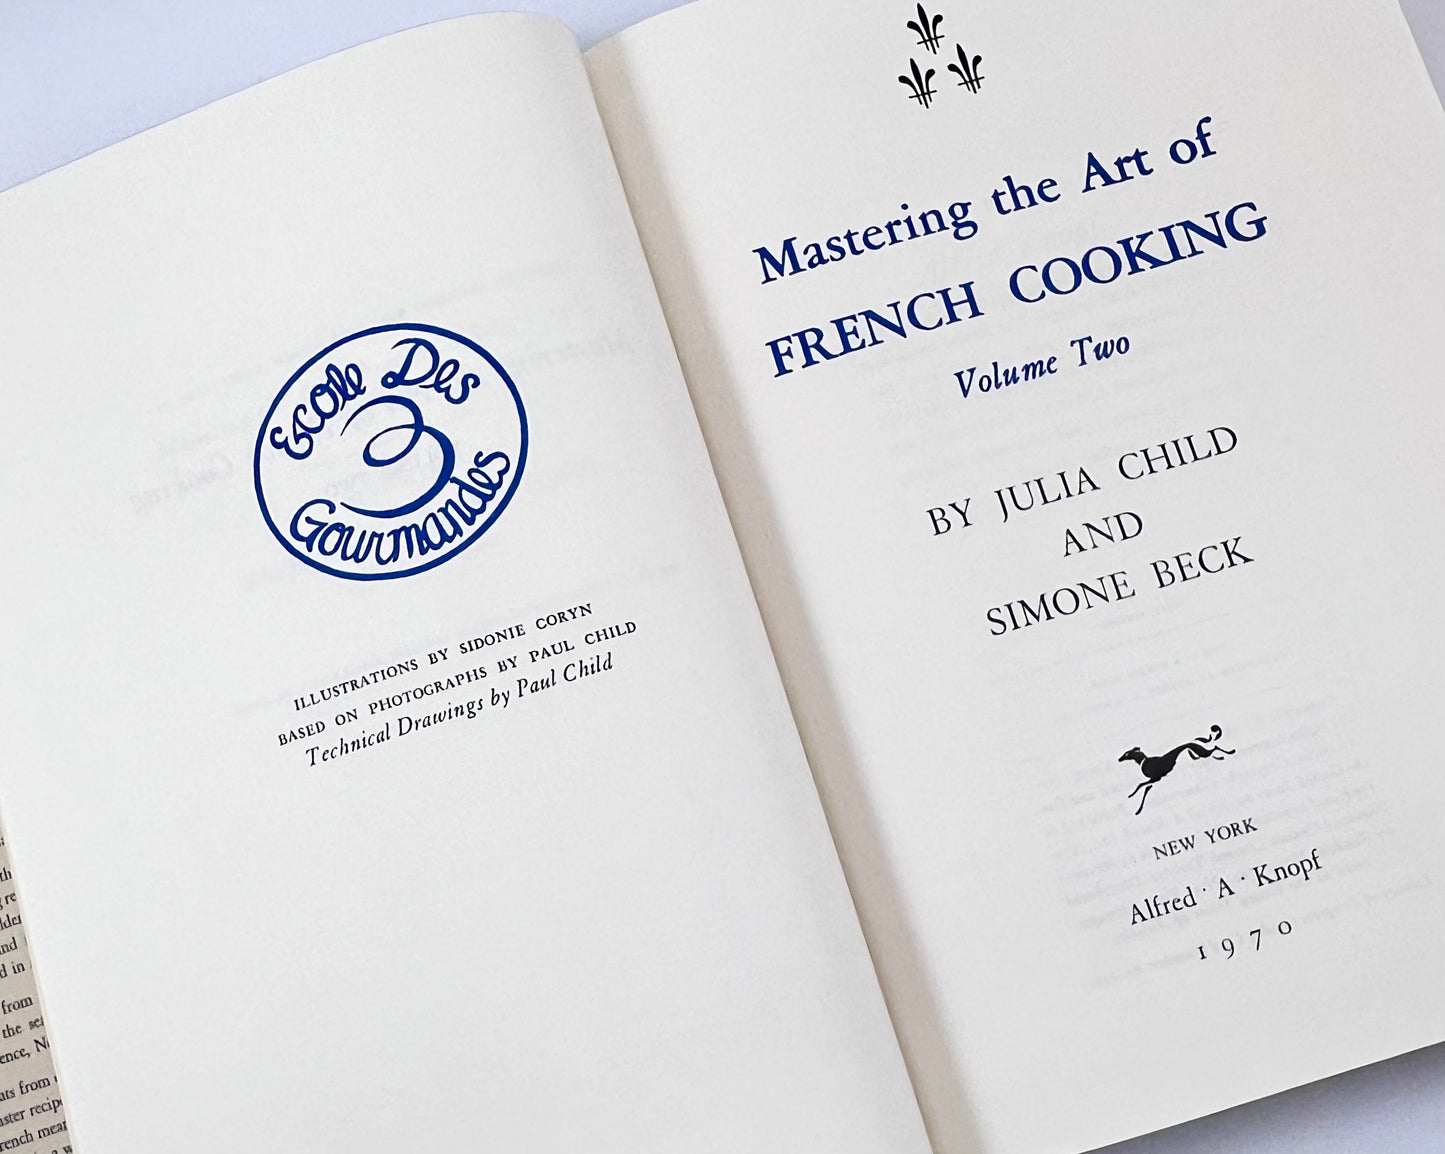 Mastering the Art of French Cooking, Volume 2, Julia Child, 1st Edition, 1970